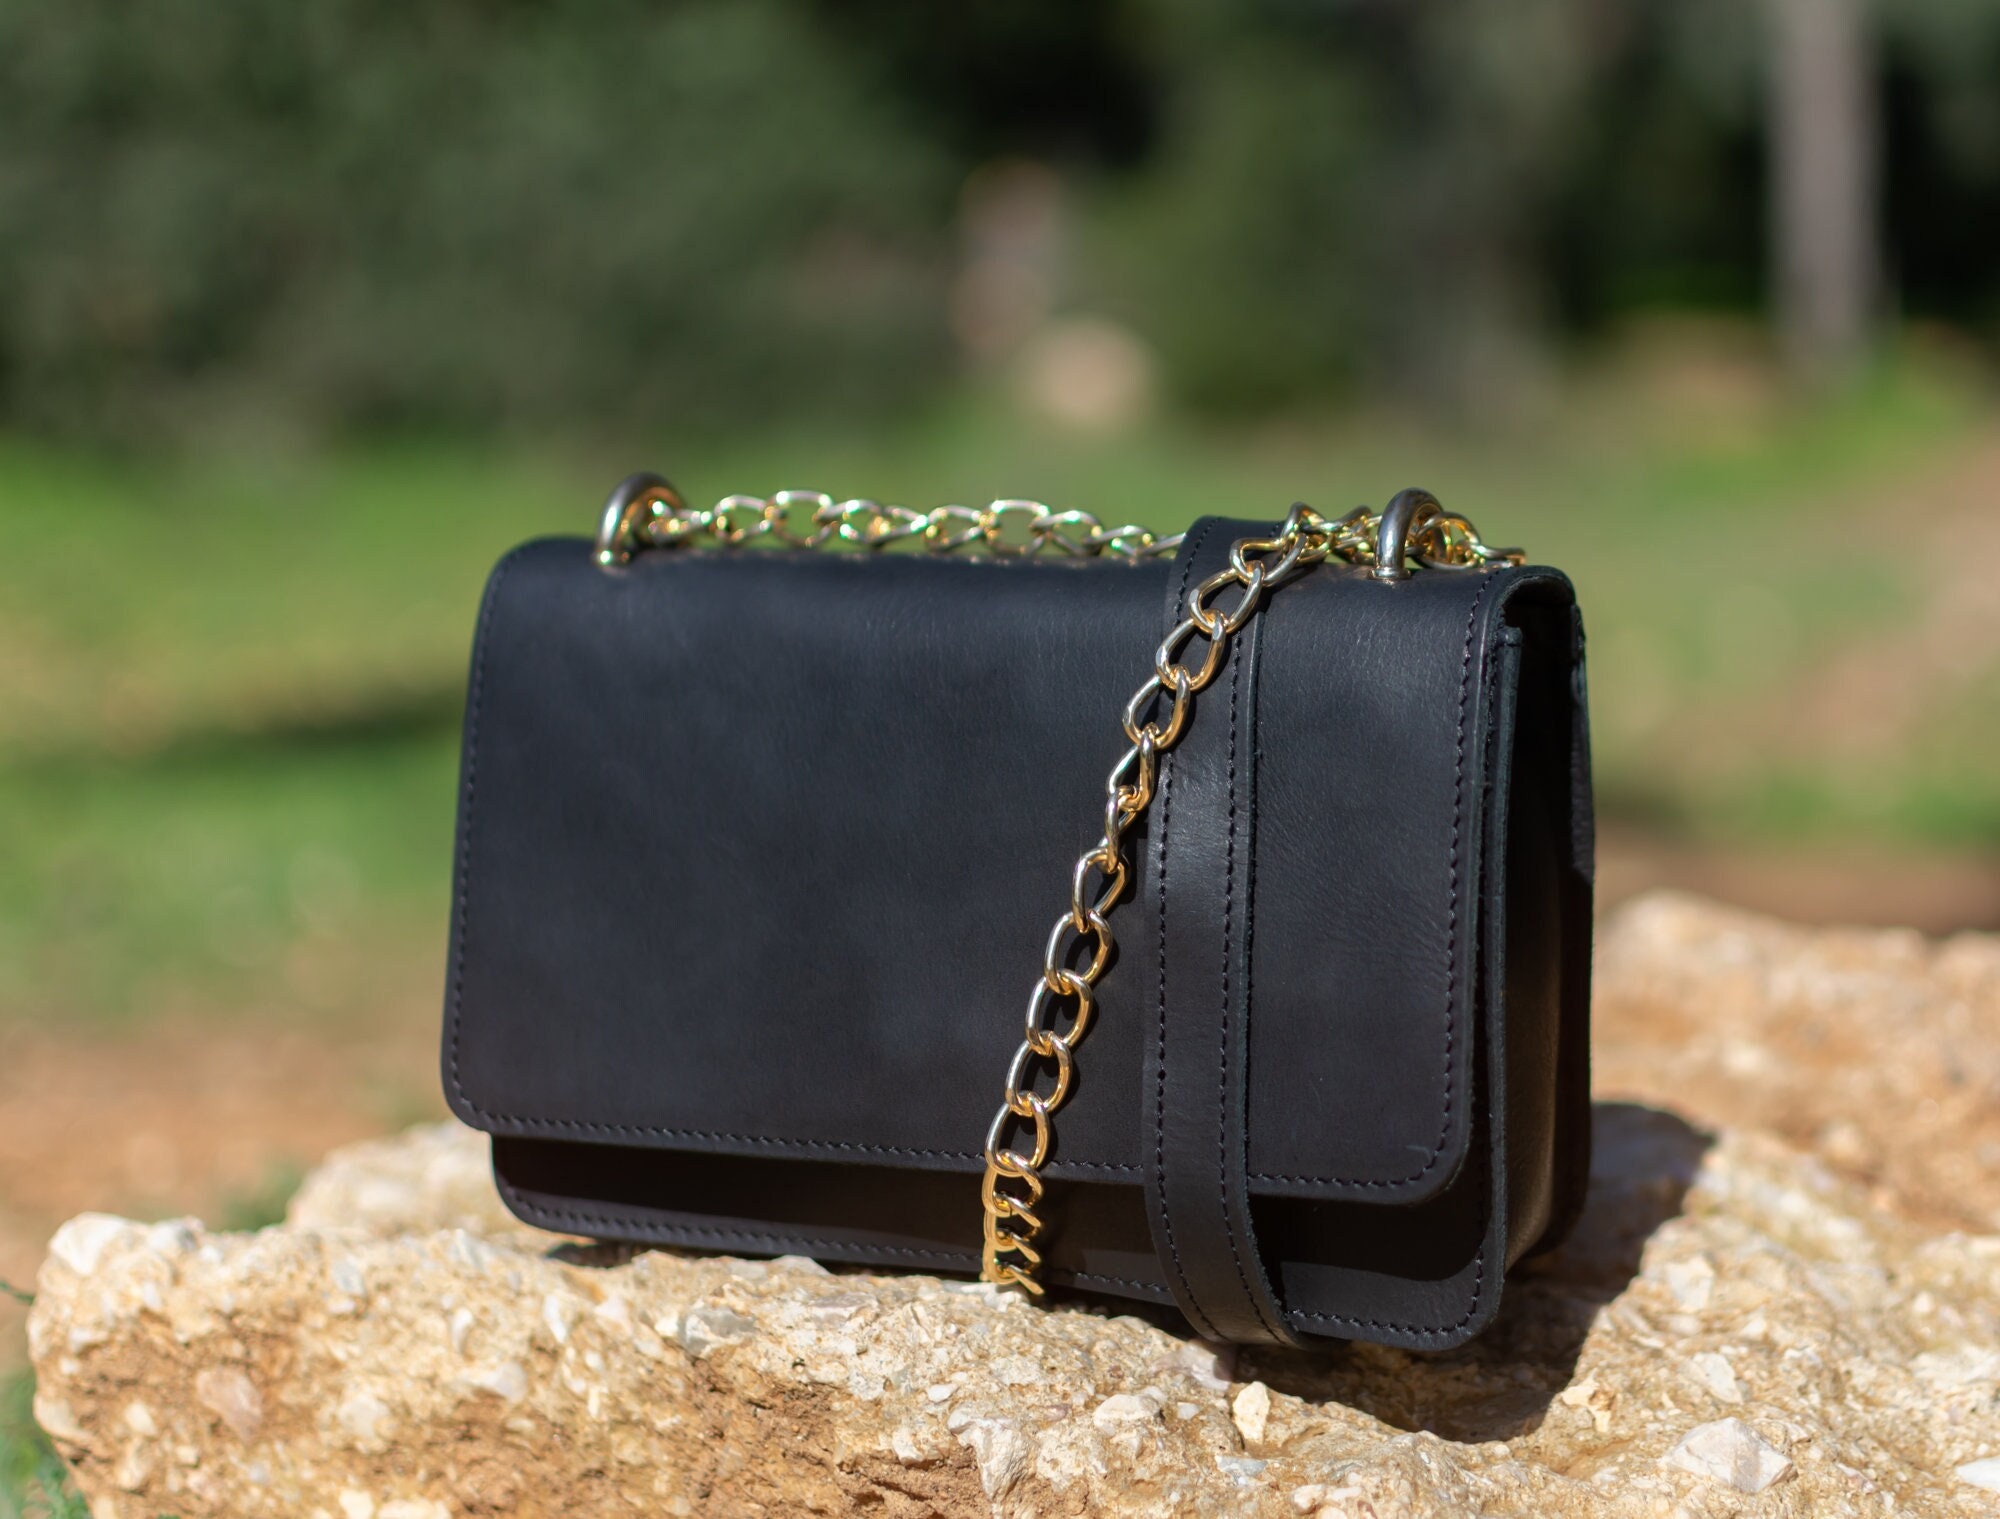 Black Bag With Gold Chain 